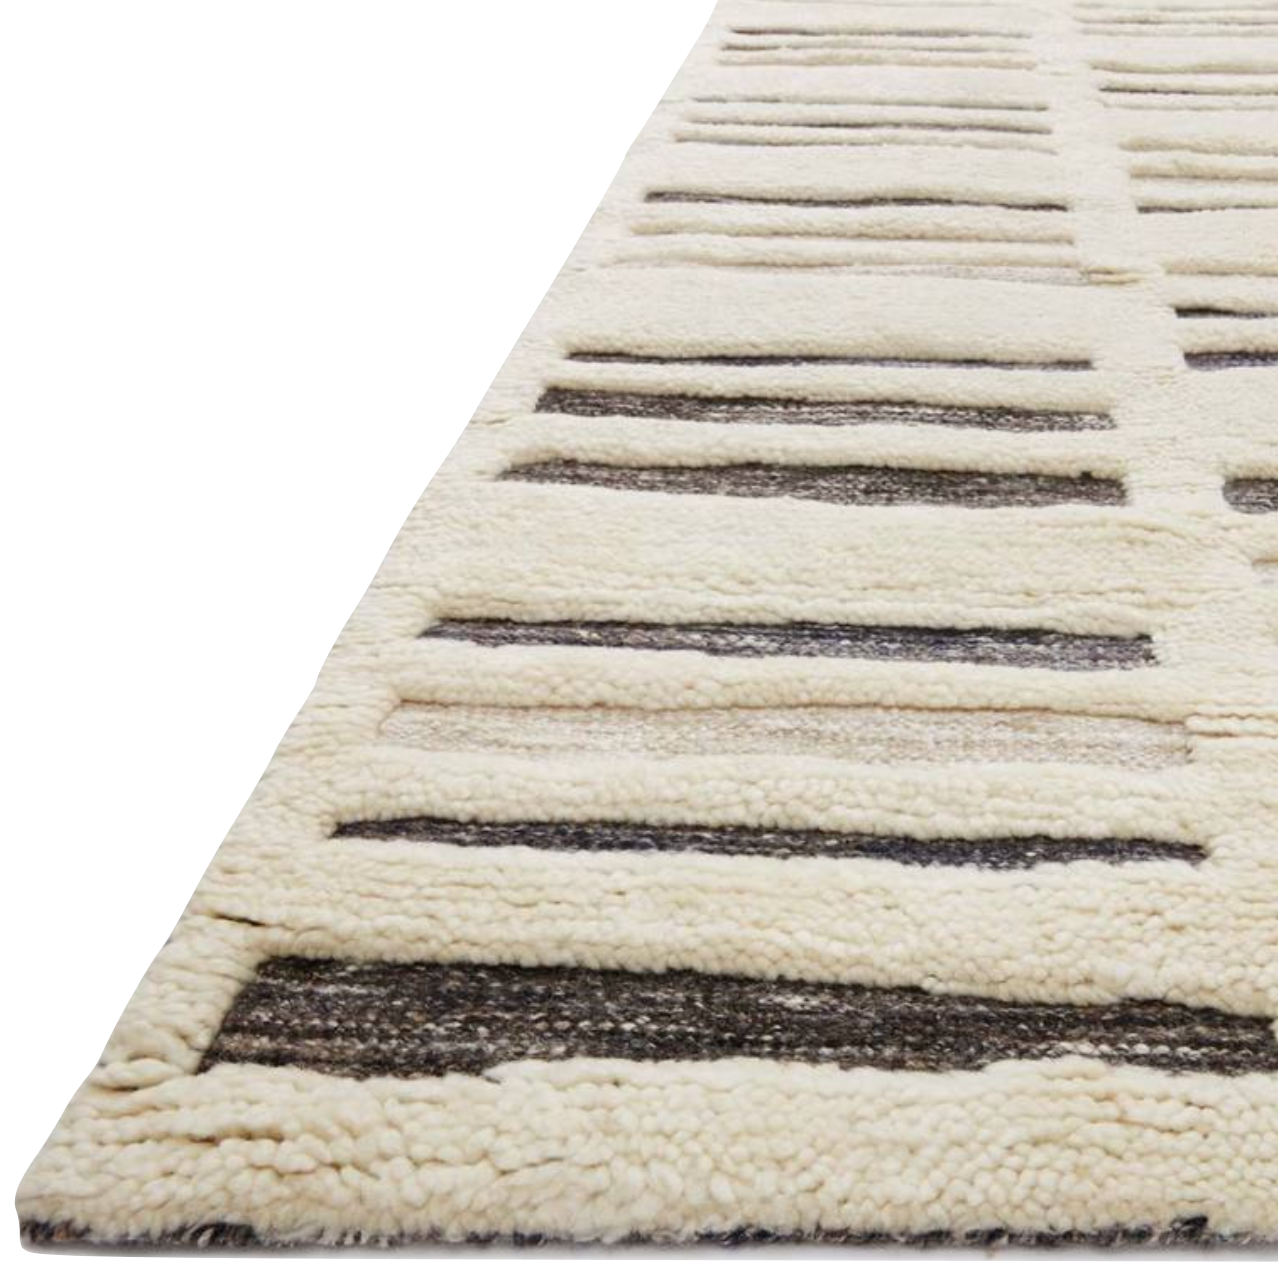 Dimensional yet soft, the Bennett Ivory / Charcoal Area Rug is hand-knotted of wool, viscose and polyester in India. Featuring a new carve like high-low pile, Bennett has an ivory base with abstract tonal designs. Plus, it's plush underfoot -- a great choice for your office, bedroom, or other medium traffic areas.   Hand Knotted 45% Wool | 32% Viscose | 17% Polyester | 6% Other Fibers Pile BEN-01 Ivory/Charcoal